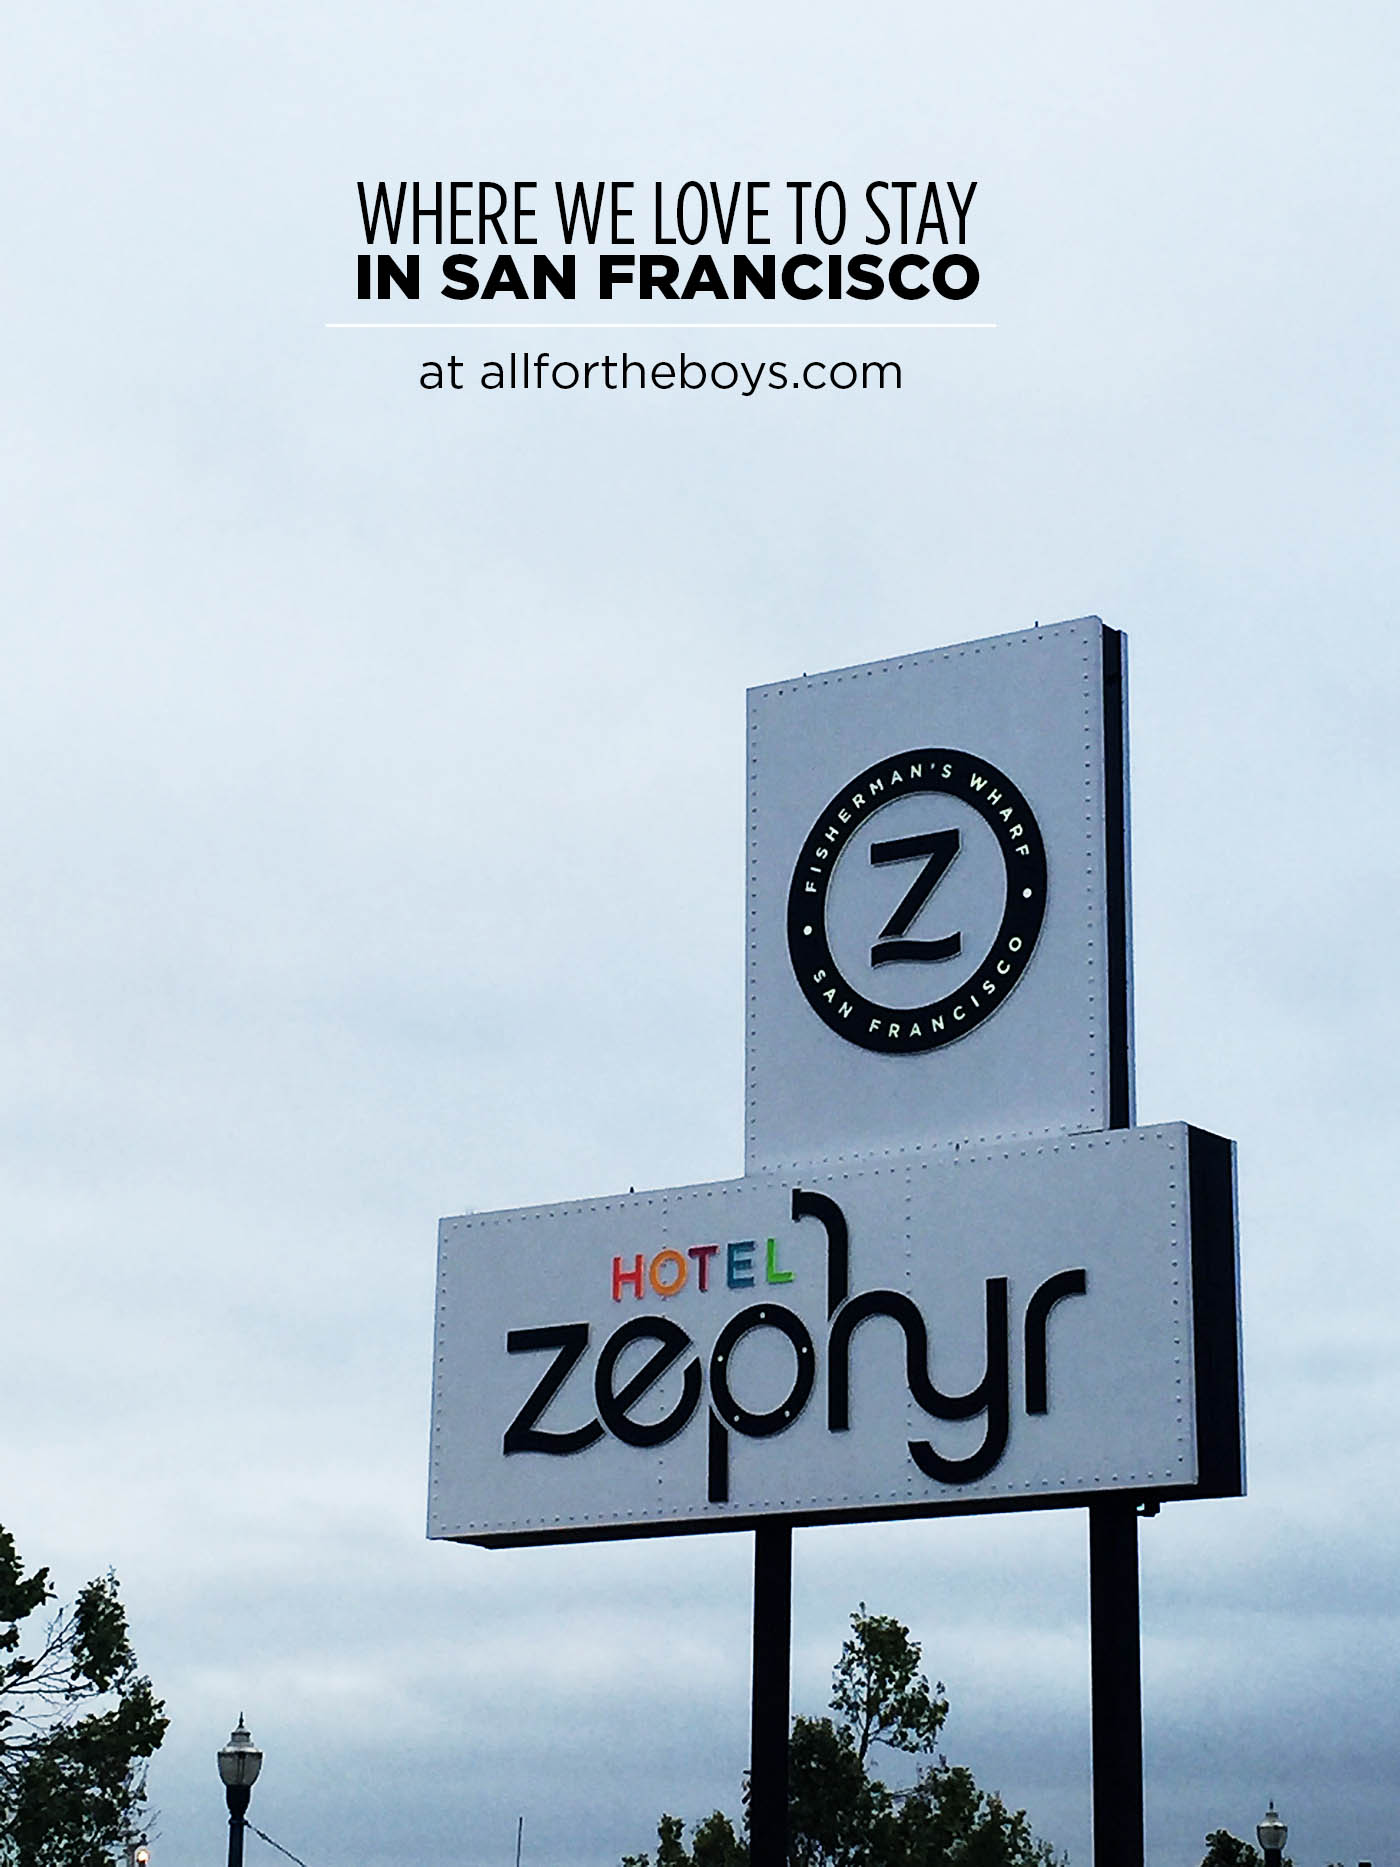 Hotel Zephyr in San Francisco is a fun family property with a great location near Fisherman's Wharf